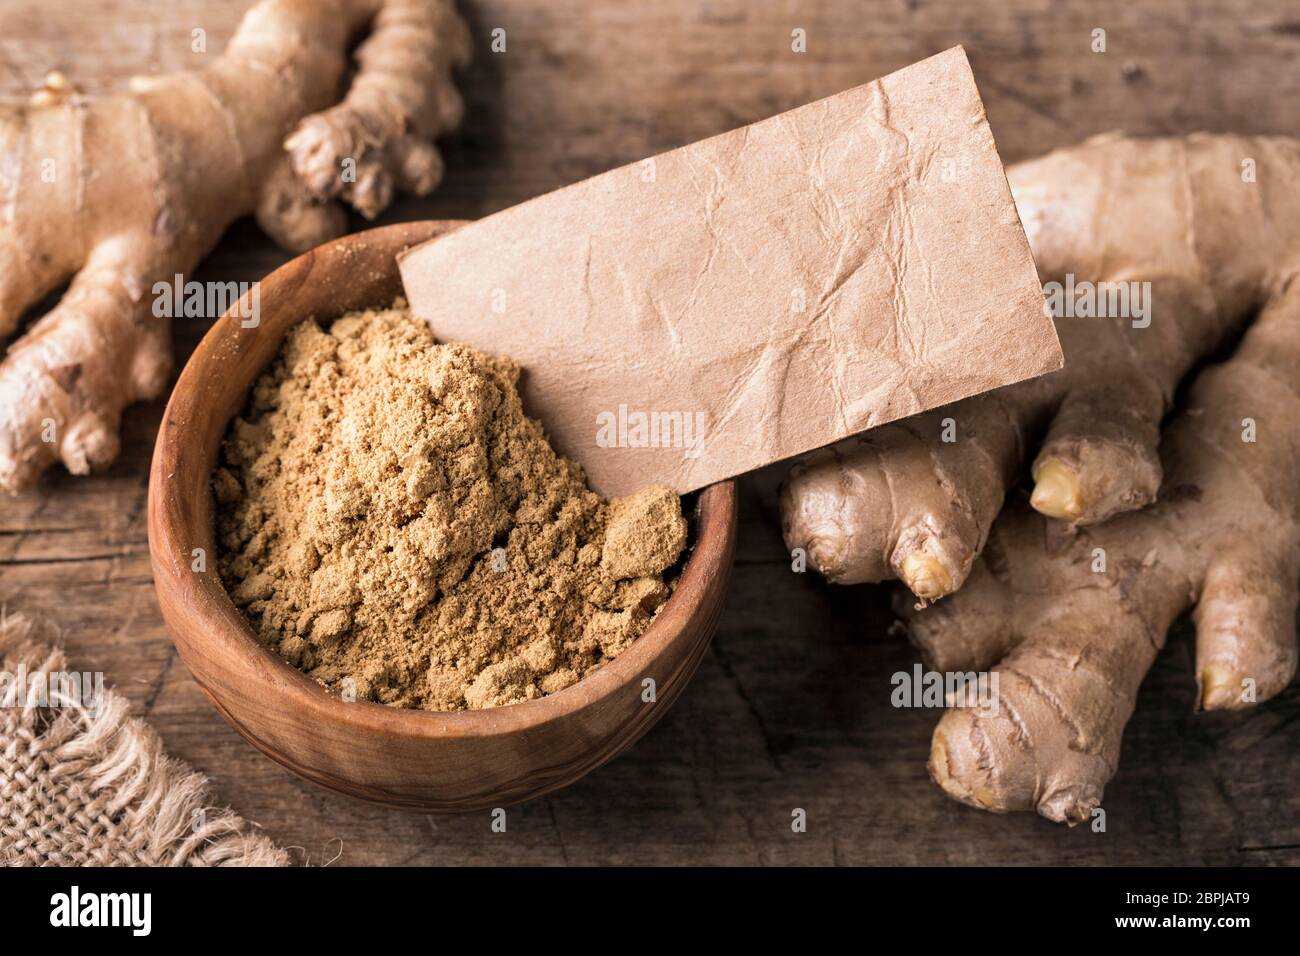 Ginger powder and fresh roots Stock Photo